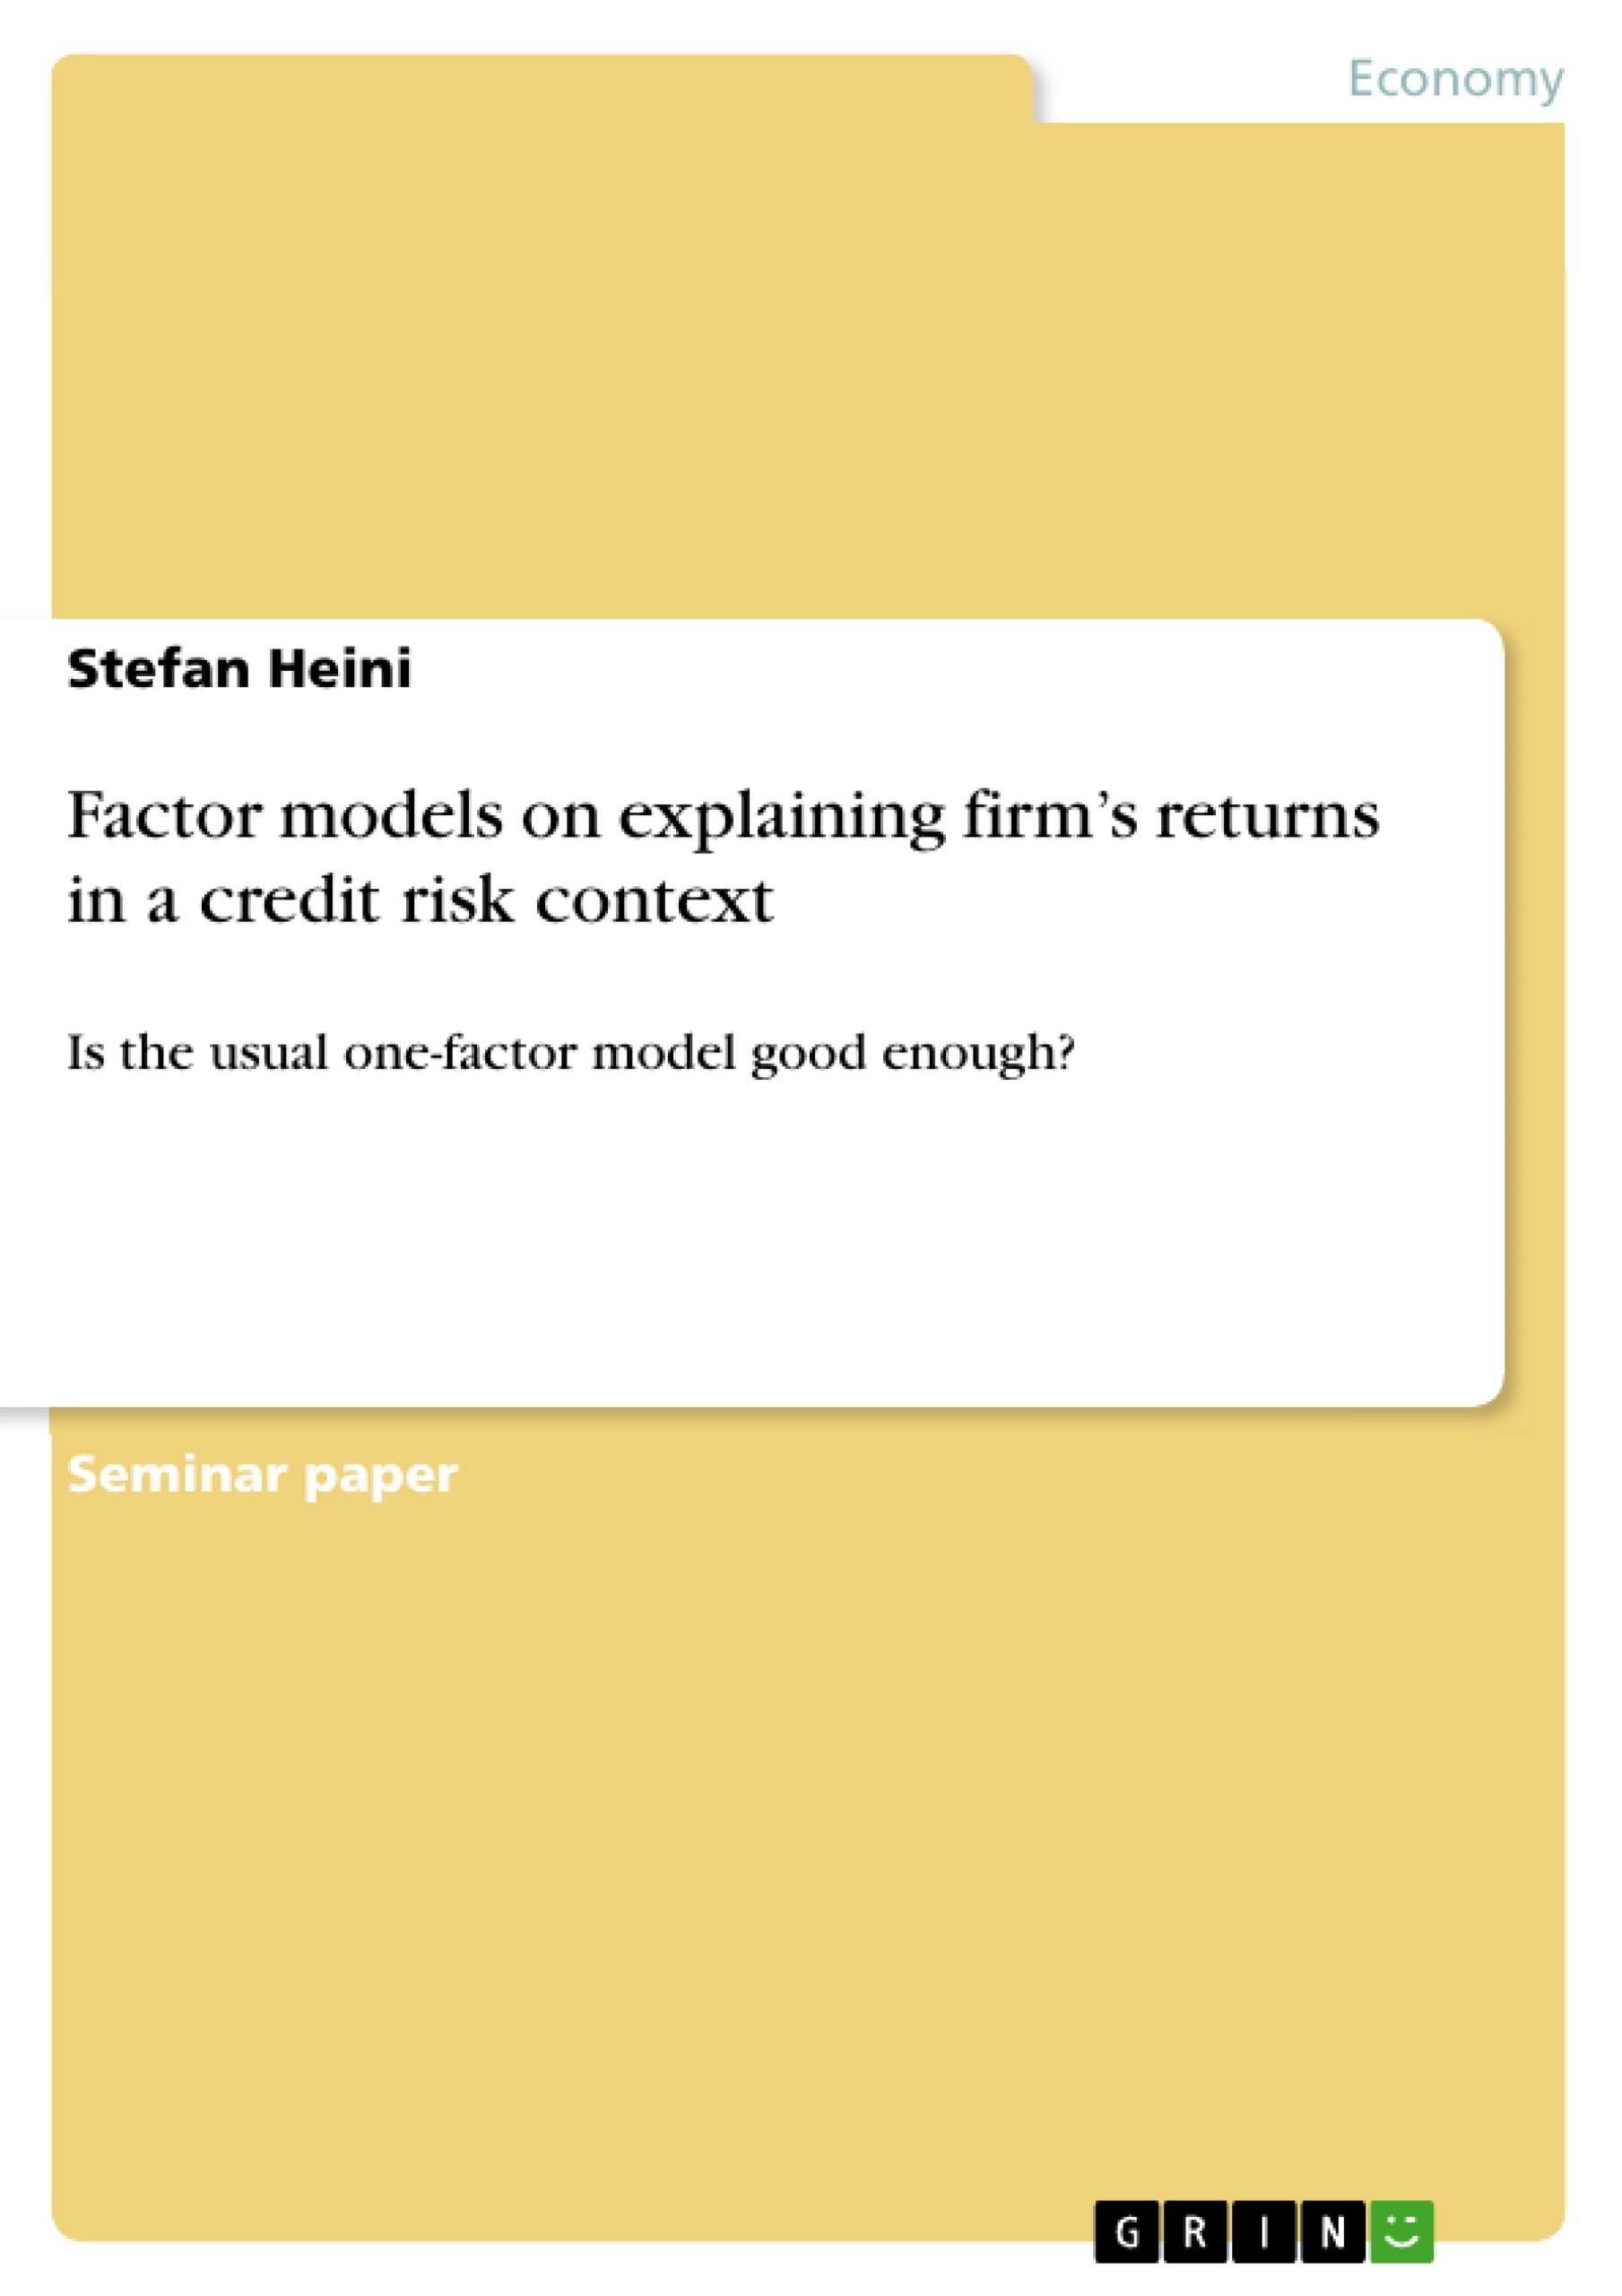 Titre: Factor models on explaining firm’s returns in a credit risk context